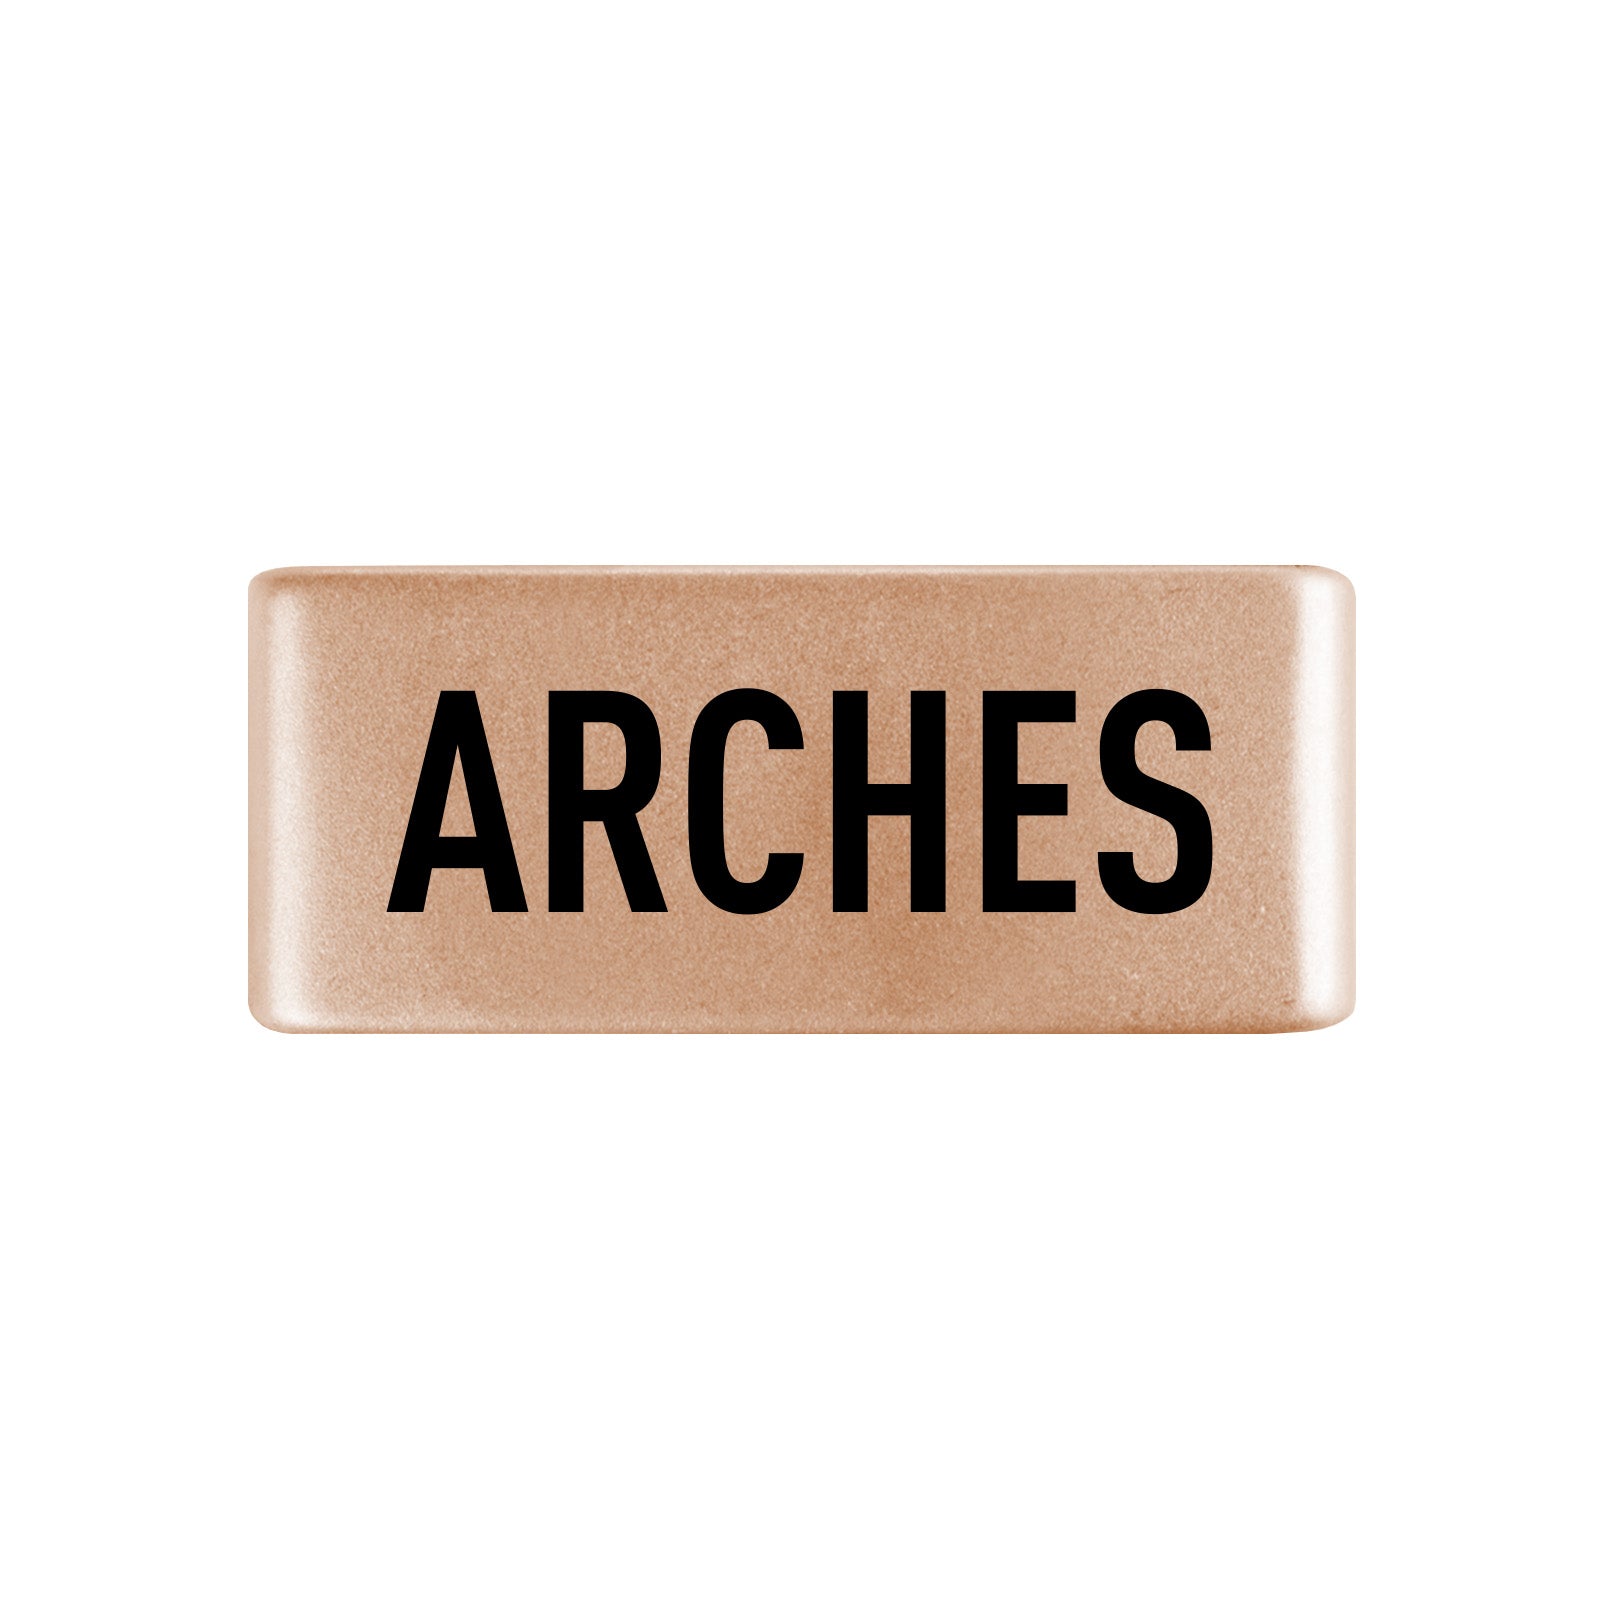 Arches Badge Badge 13mm - ROAD iD